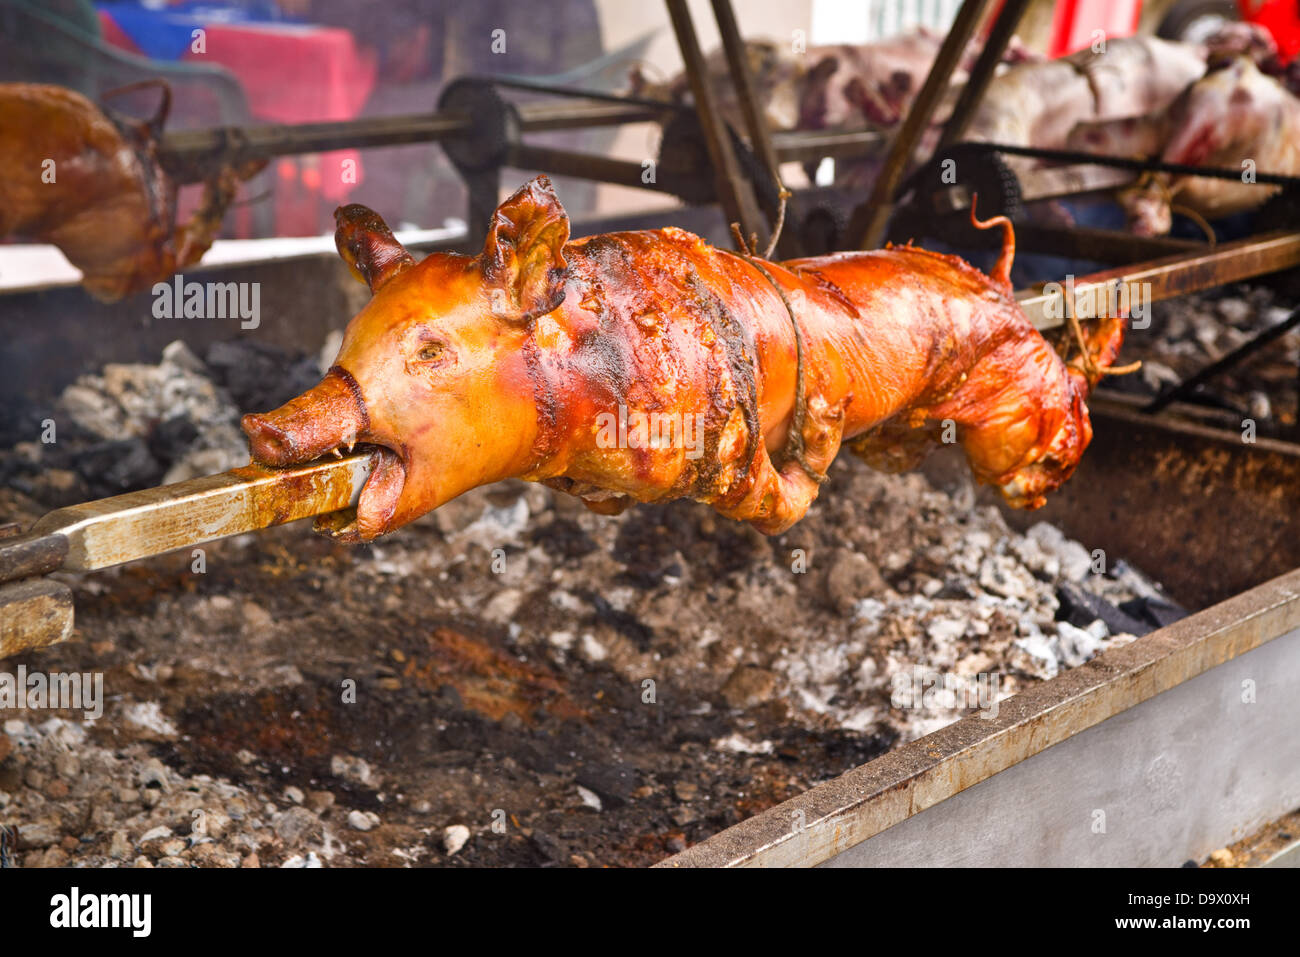 Whole roasted pig on a steel spit Stock Photo